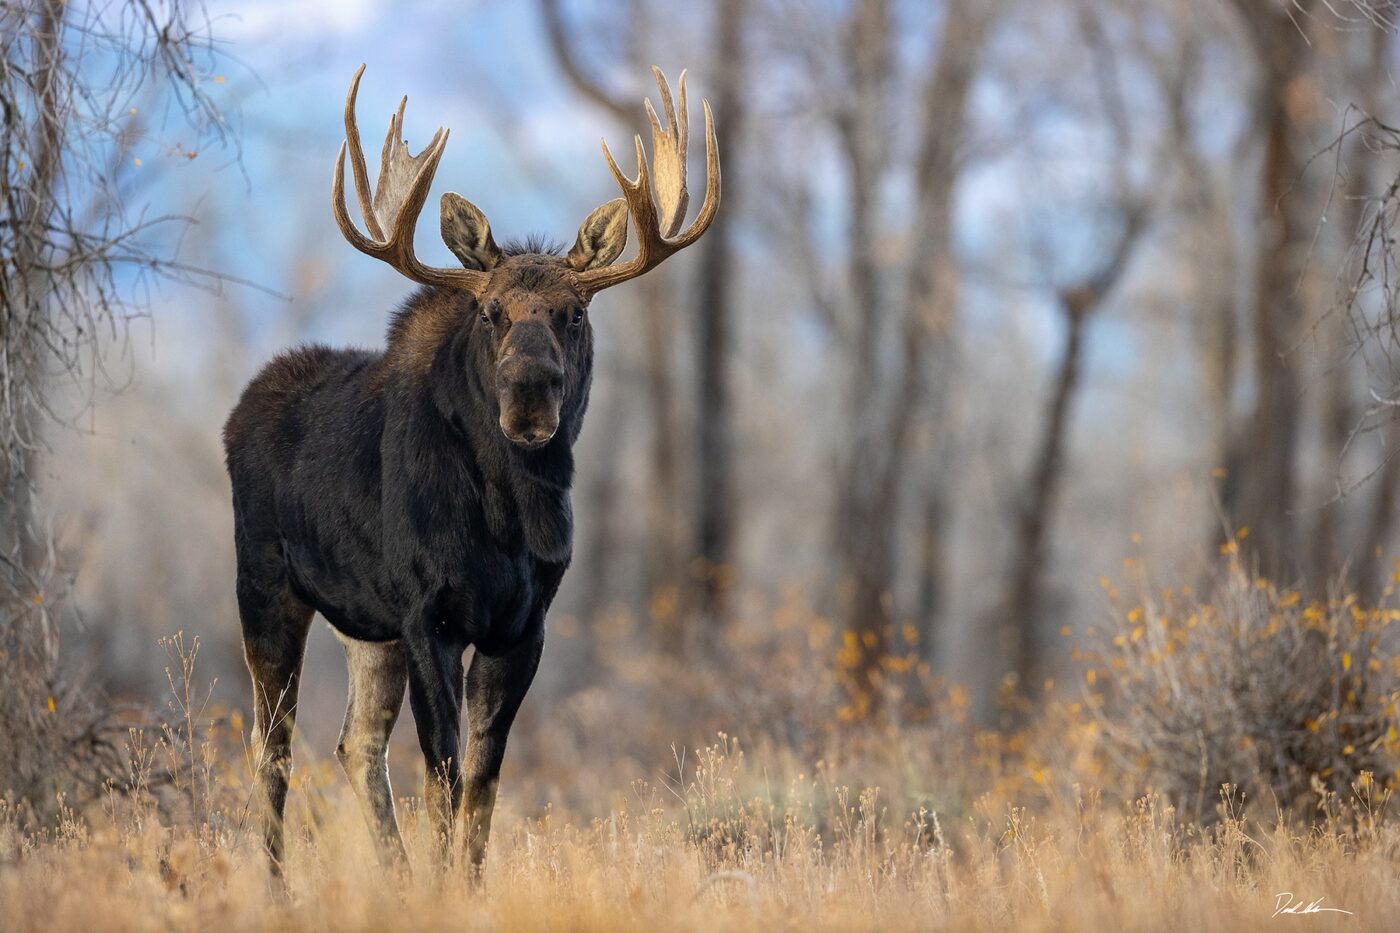 Large male moose in Grand Teton National Park standing in the woods looking directly at the camera